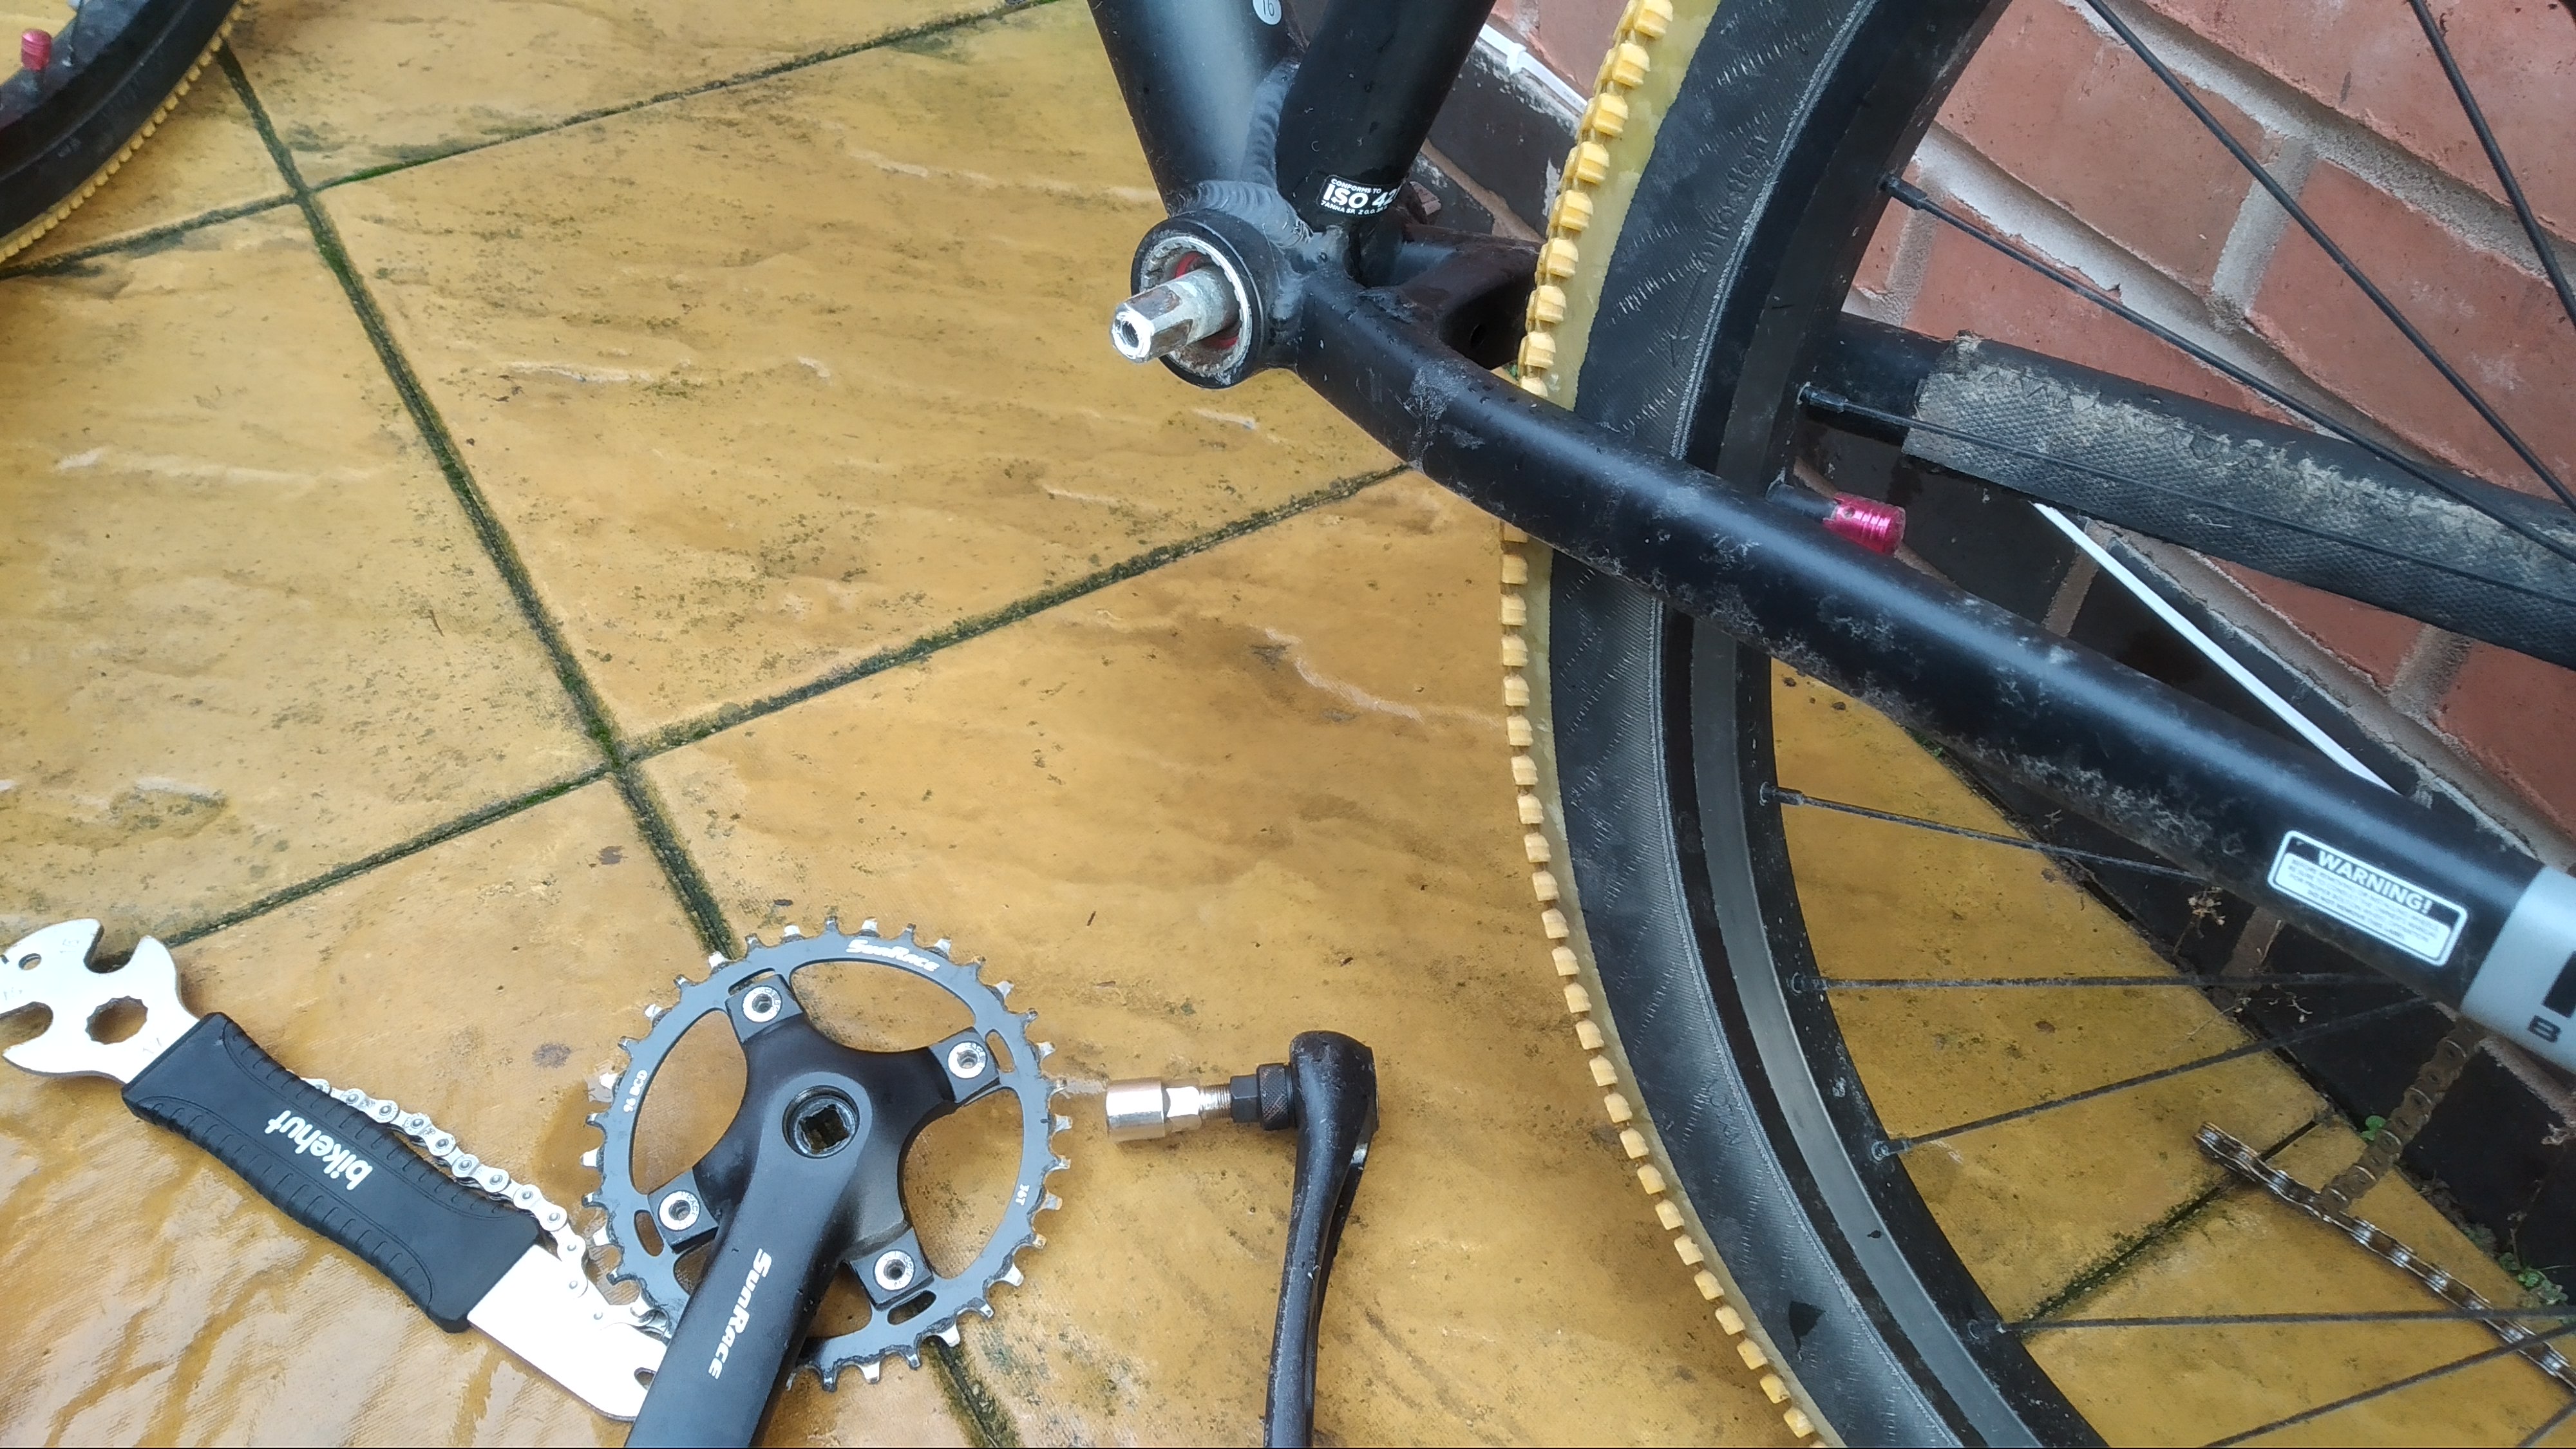 Both cranks on the floor, one with the crank removal tool still in it. A pedal spanner lays next to them. The BB is visible with no cranks on it, still installed in the frame.